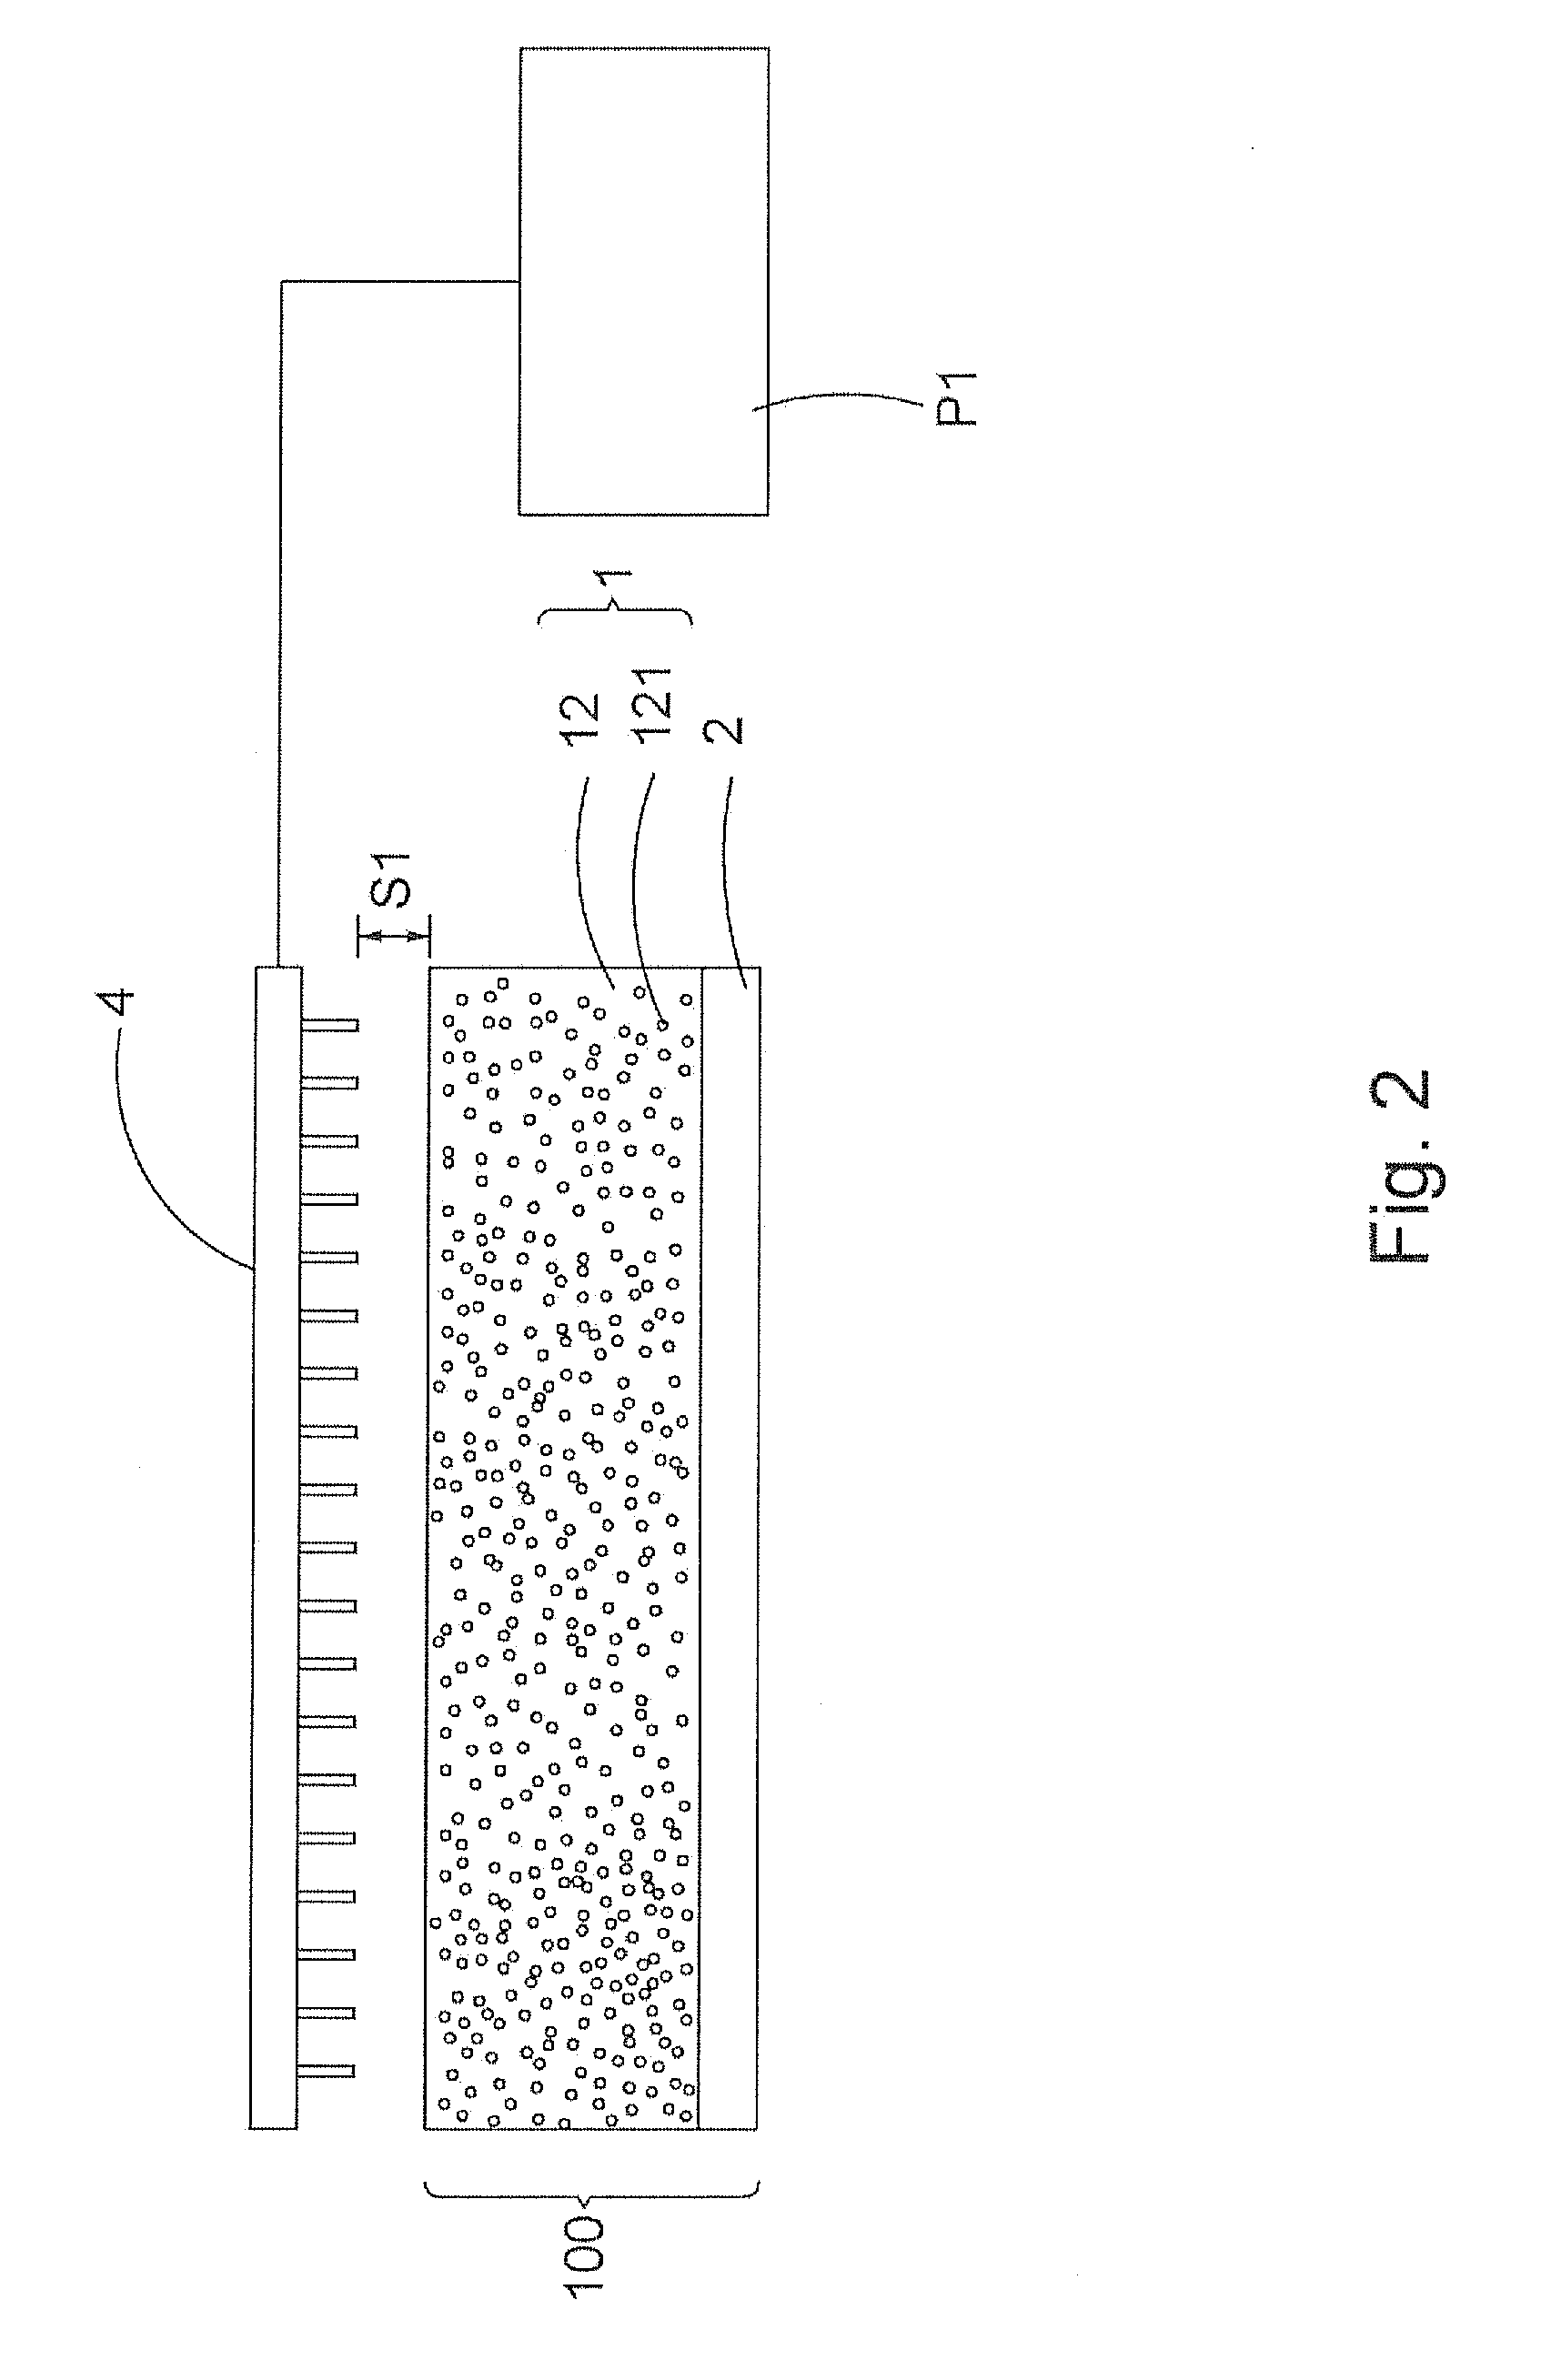 Polymeric Electret Film and Method of Manufacturing the Same